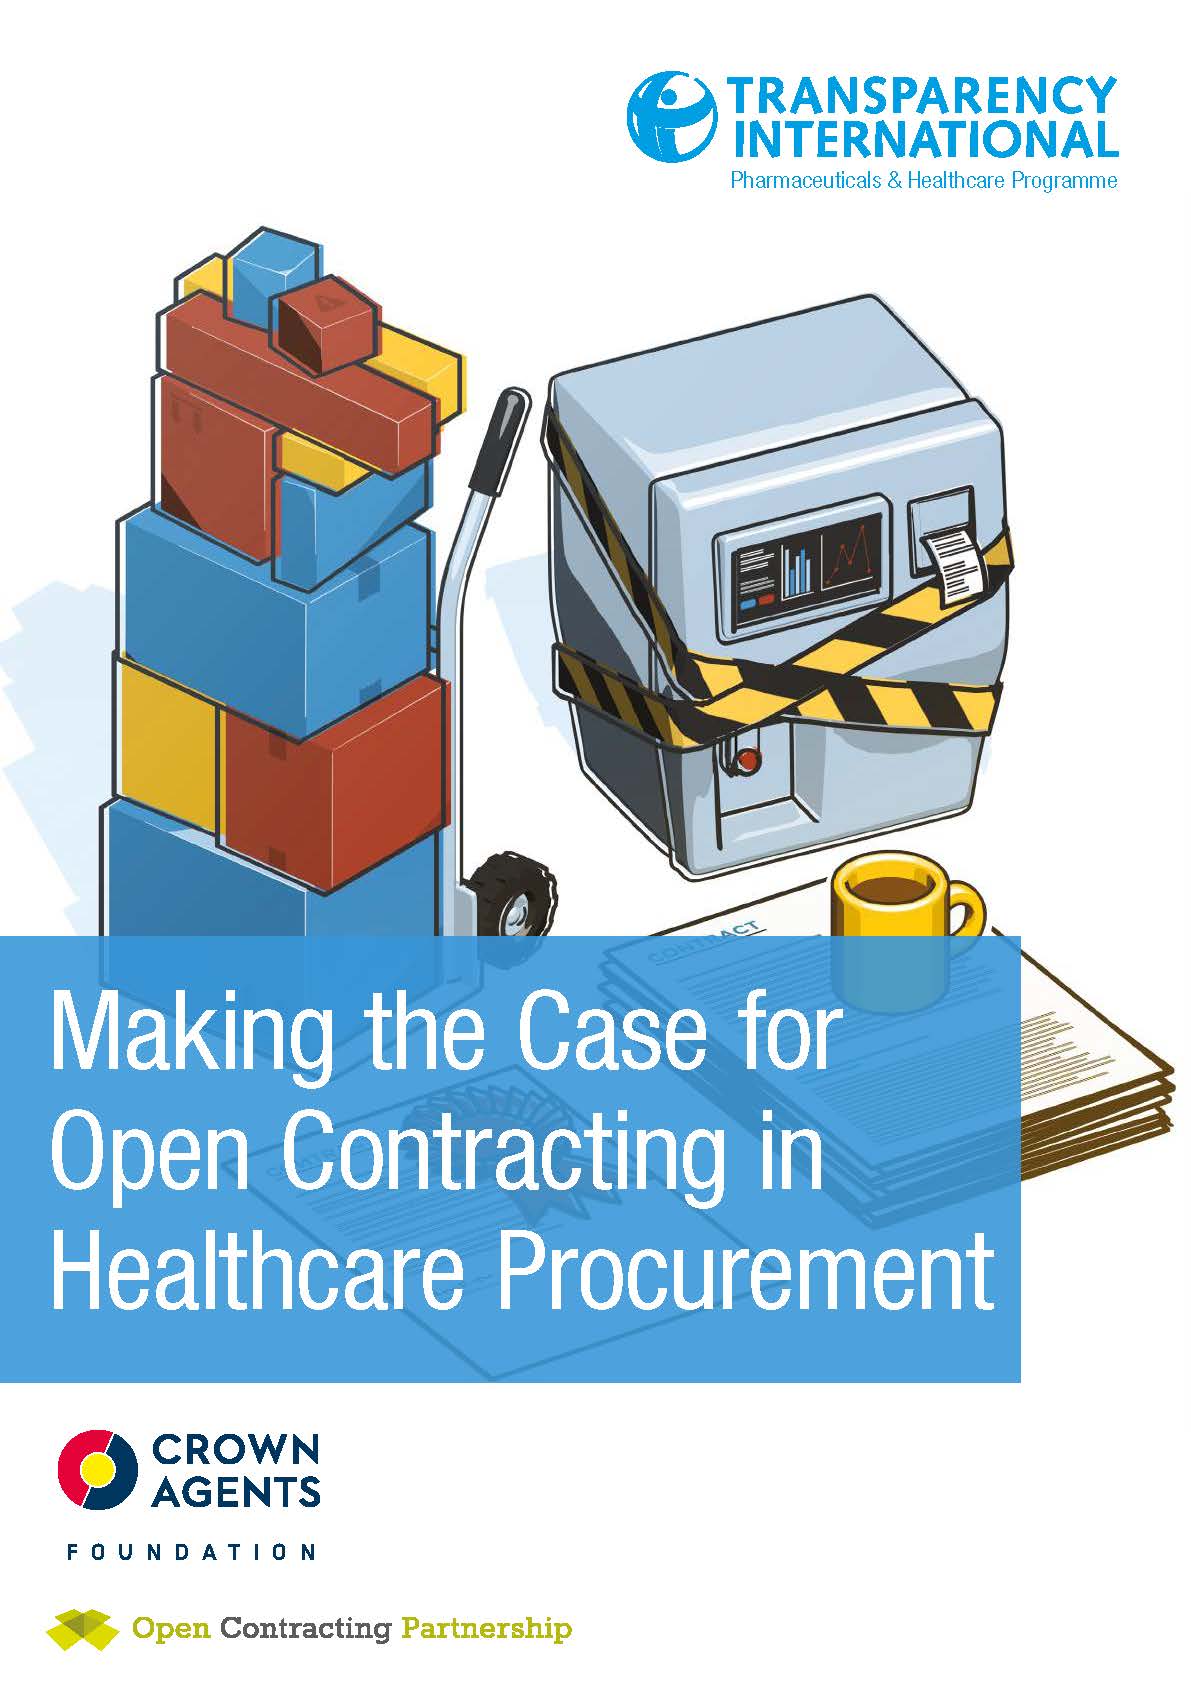 Pages from TI_Making the Case for Open_Contracting Healthcare_2017.jpg